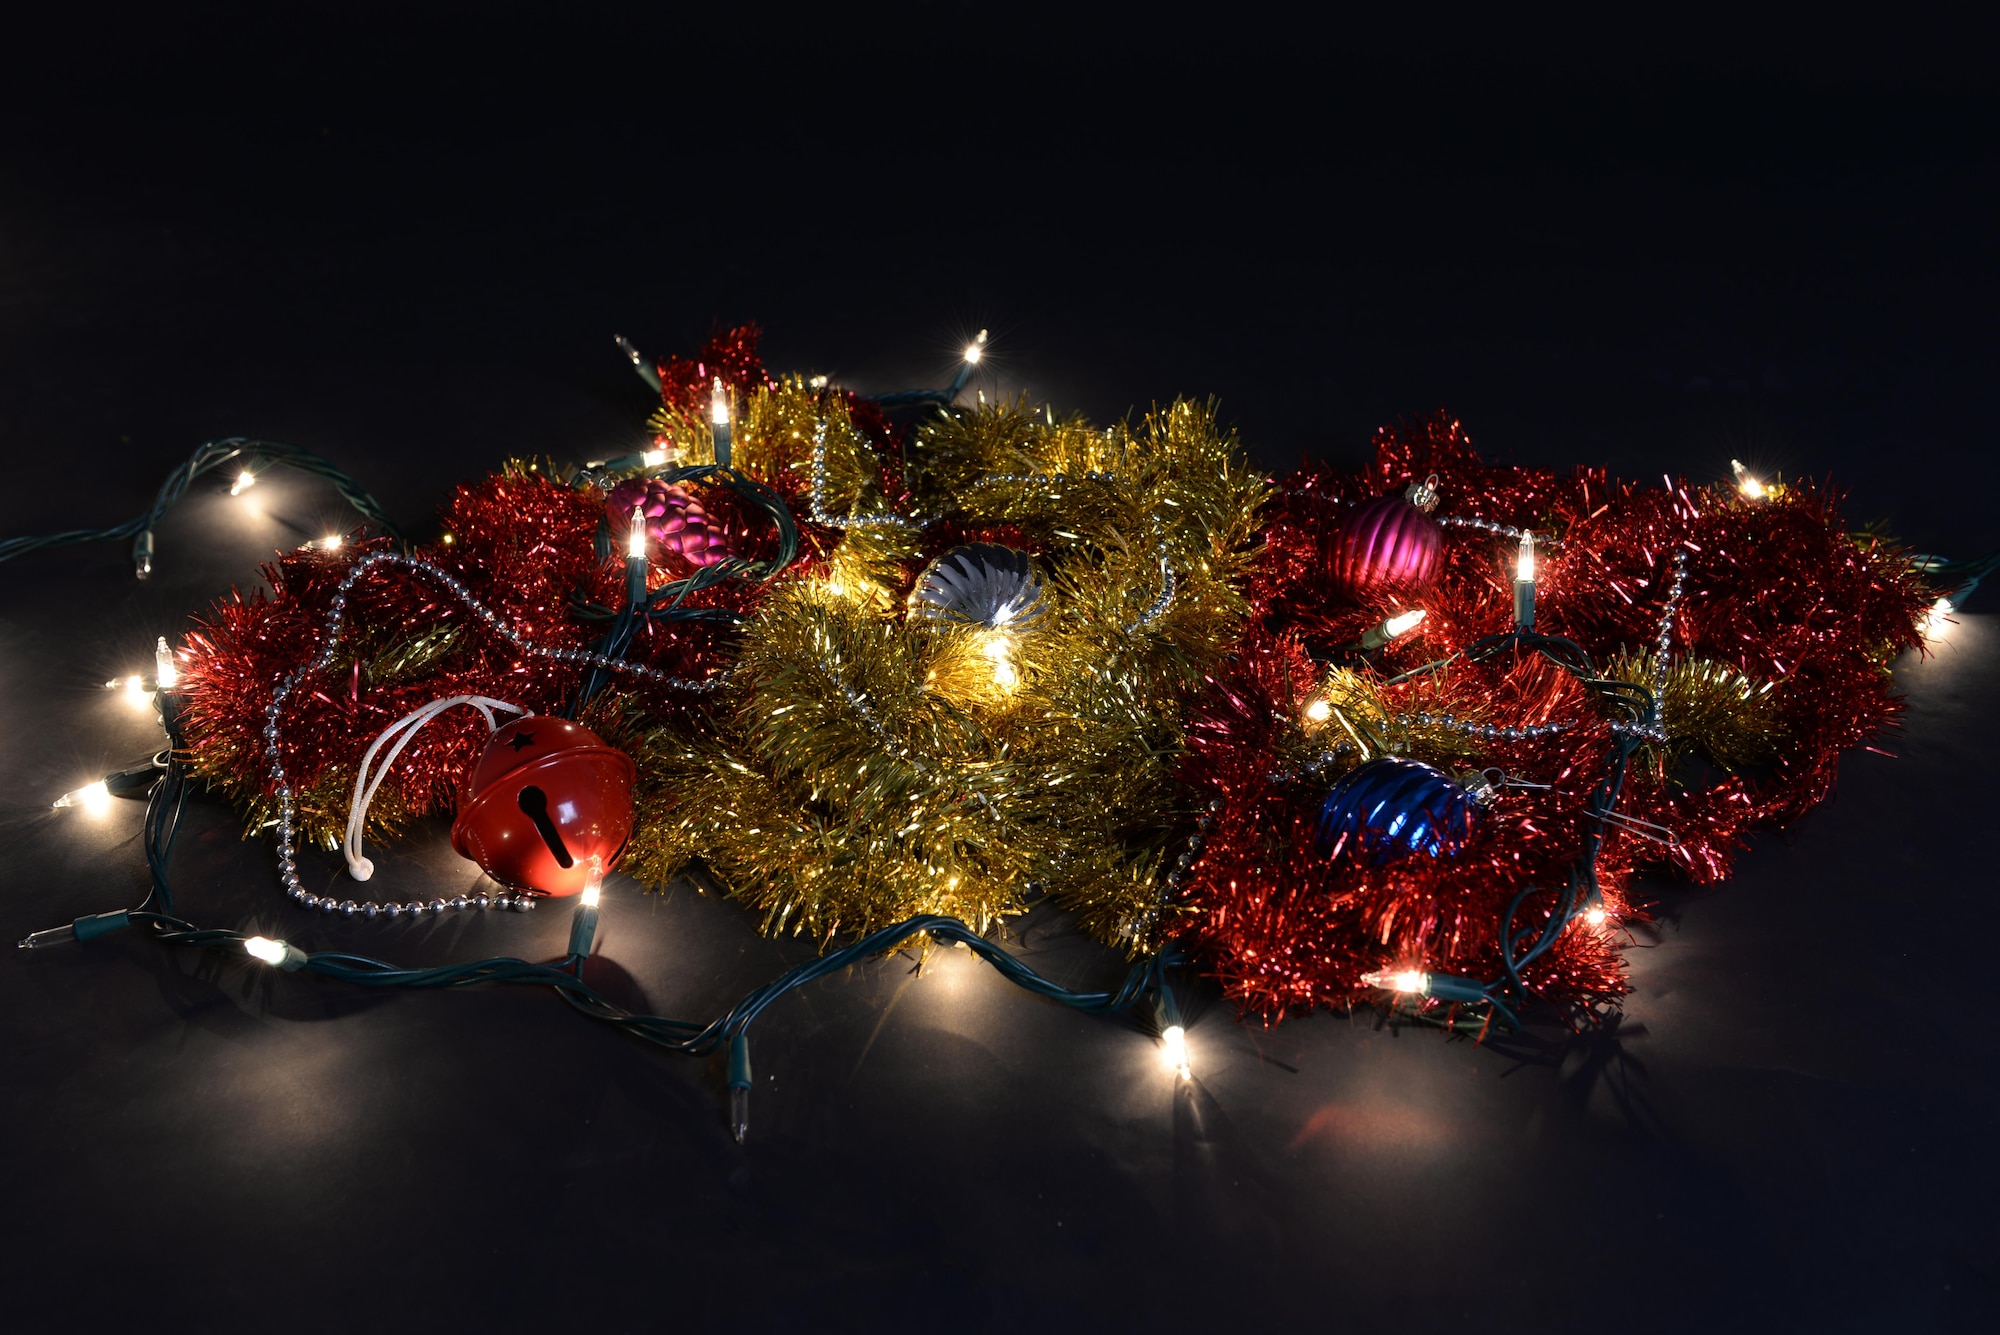 Decorations shine bright as the holiday season is in full swing. Many people around the world will decorate inside and out for the upcoming months. (U.S. Air Force photo illustration by Airman 1st Class Cassandra Whitman)